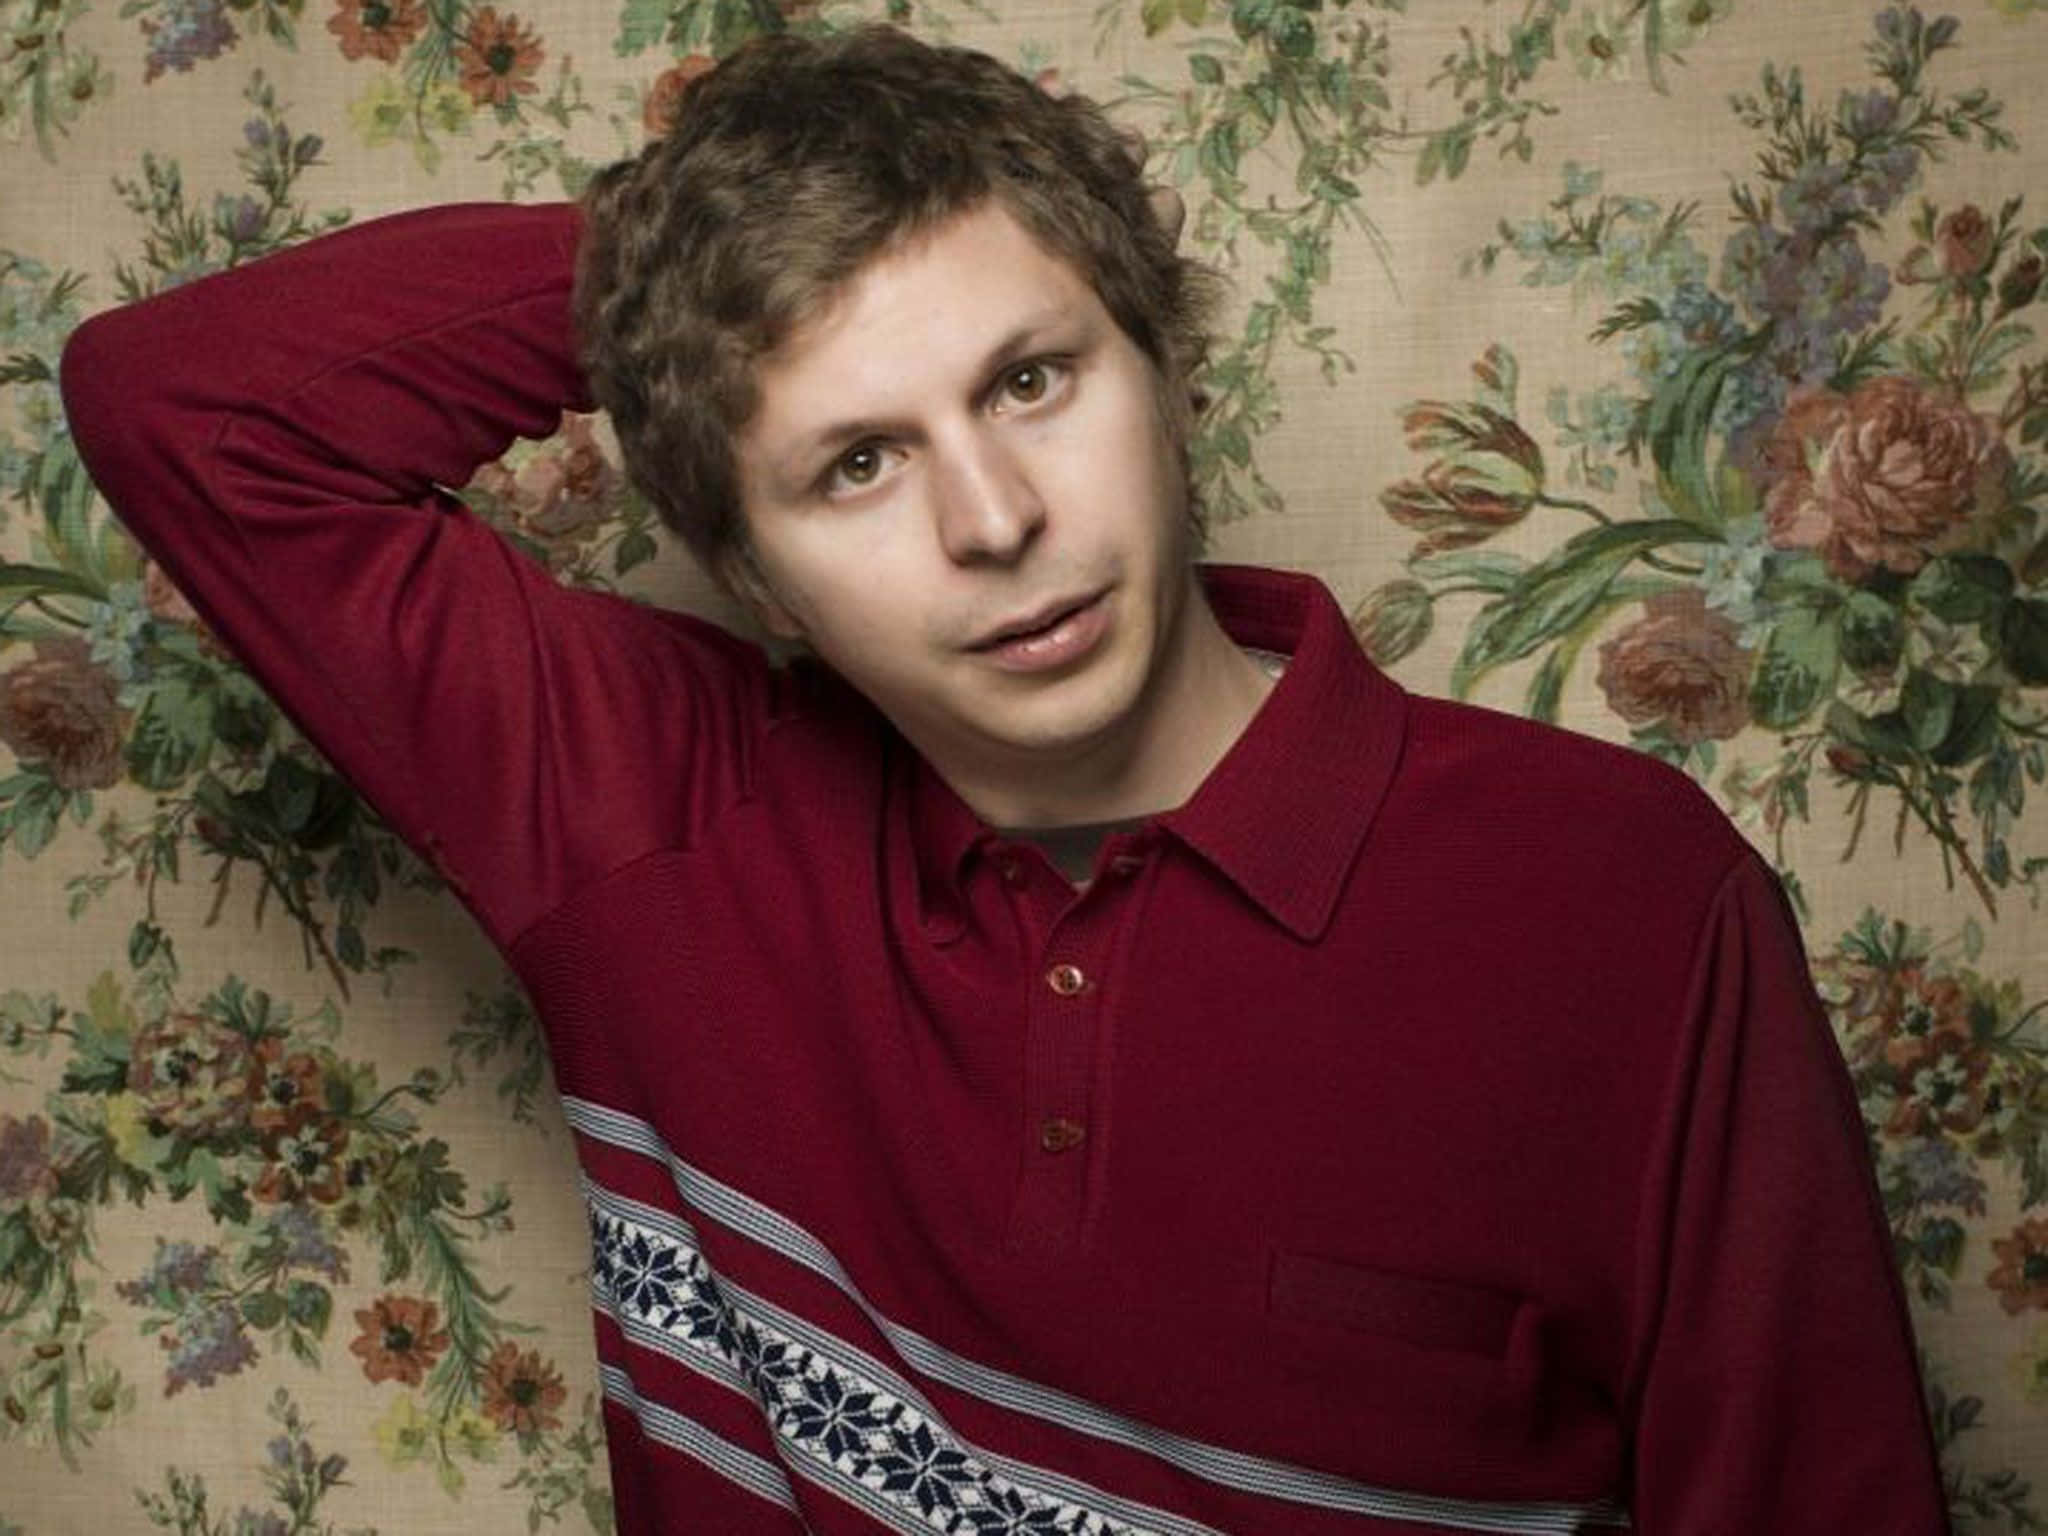 A Smiling Michael Cera Amid A Colorful, Abstract Background. Wallpaper